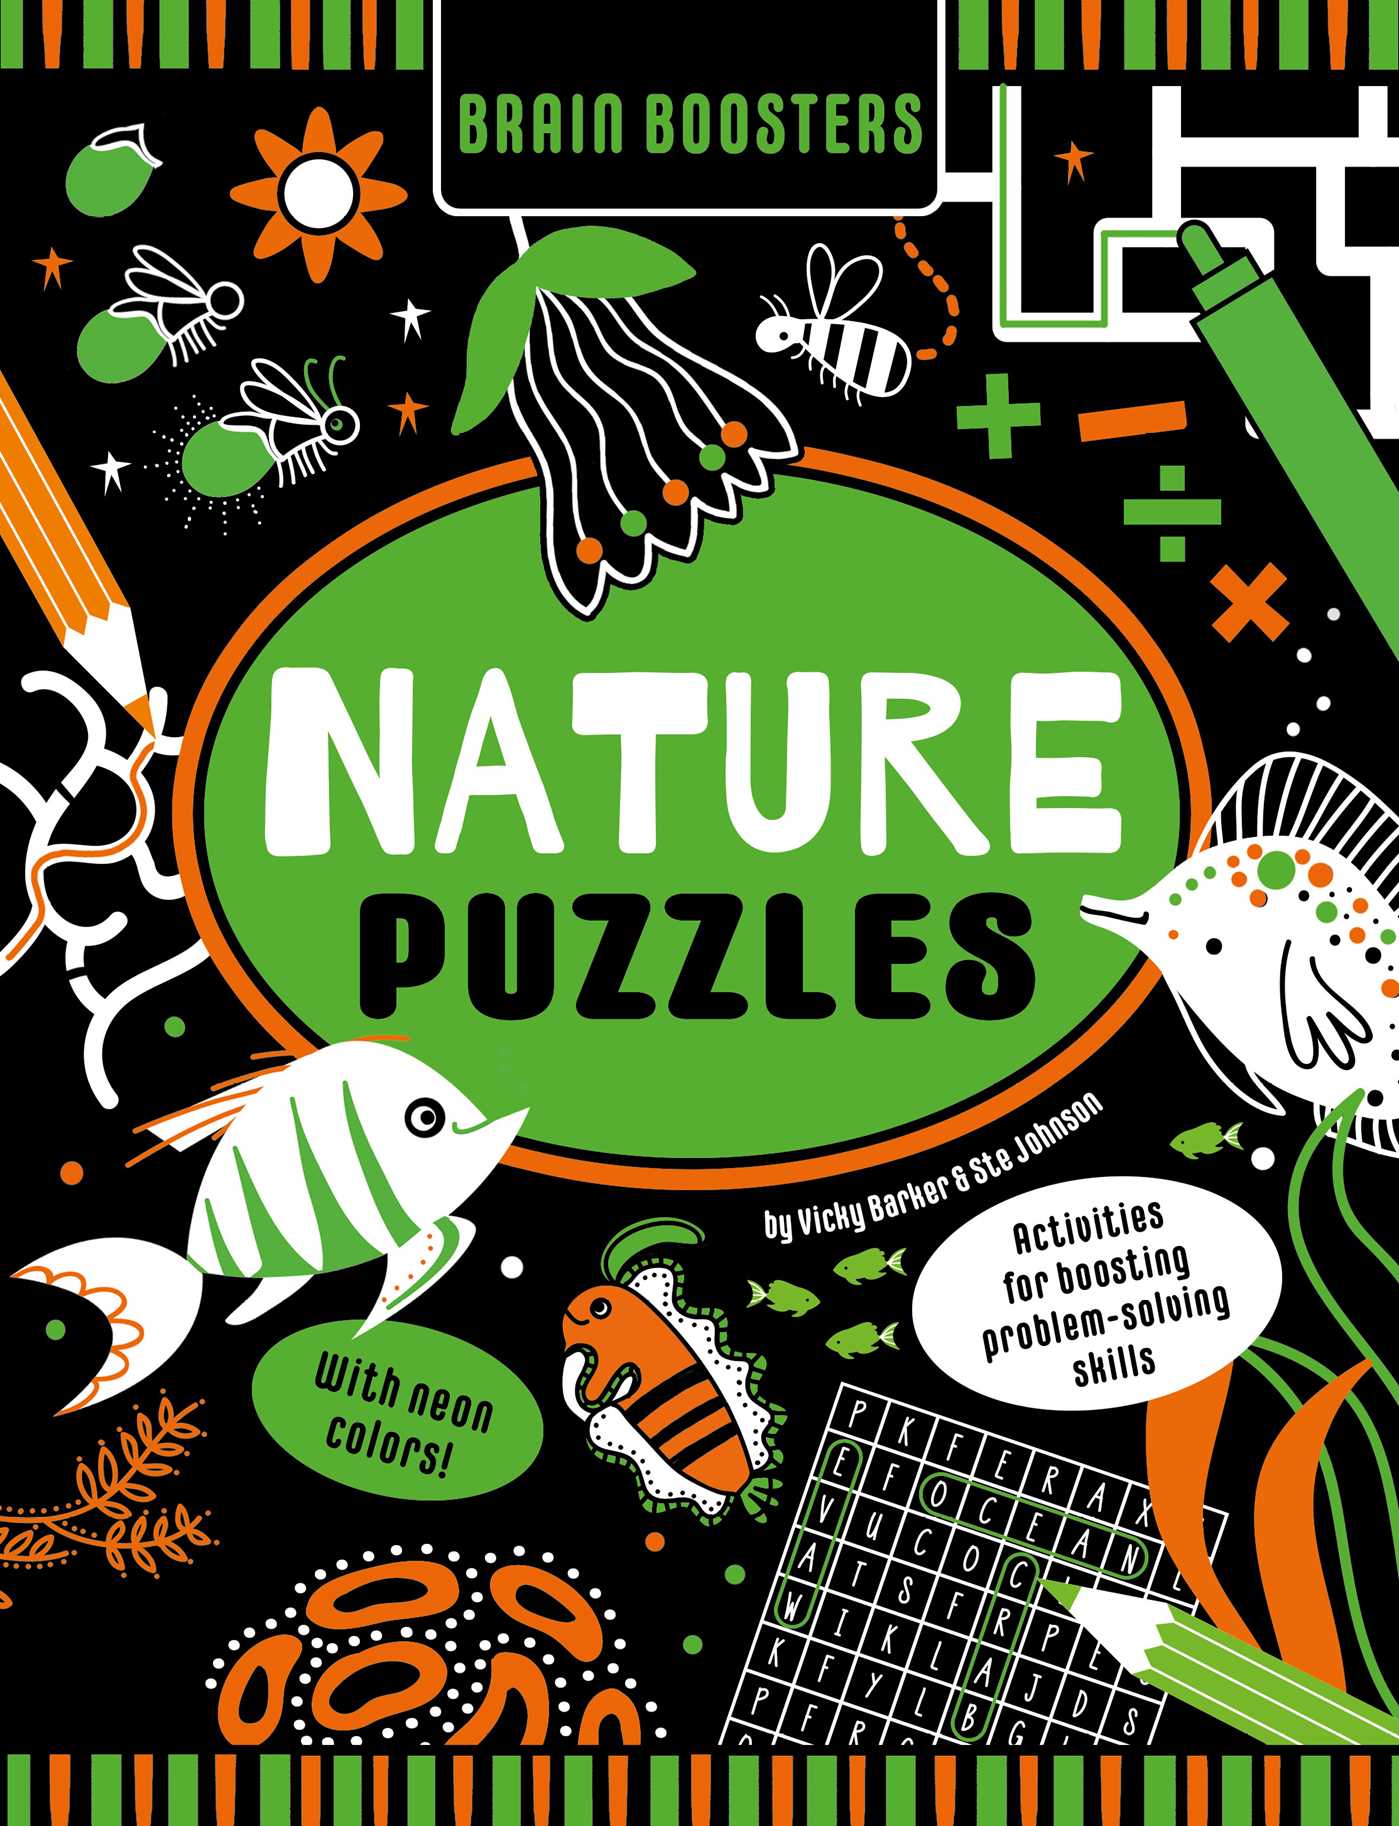 Brain Boosters Nature Puzzles (with neon colors) Learning Activity Book for Kids : Activities for boosting problem-solving skills